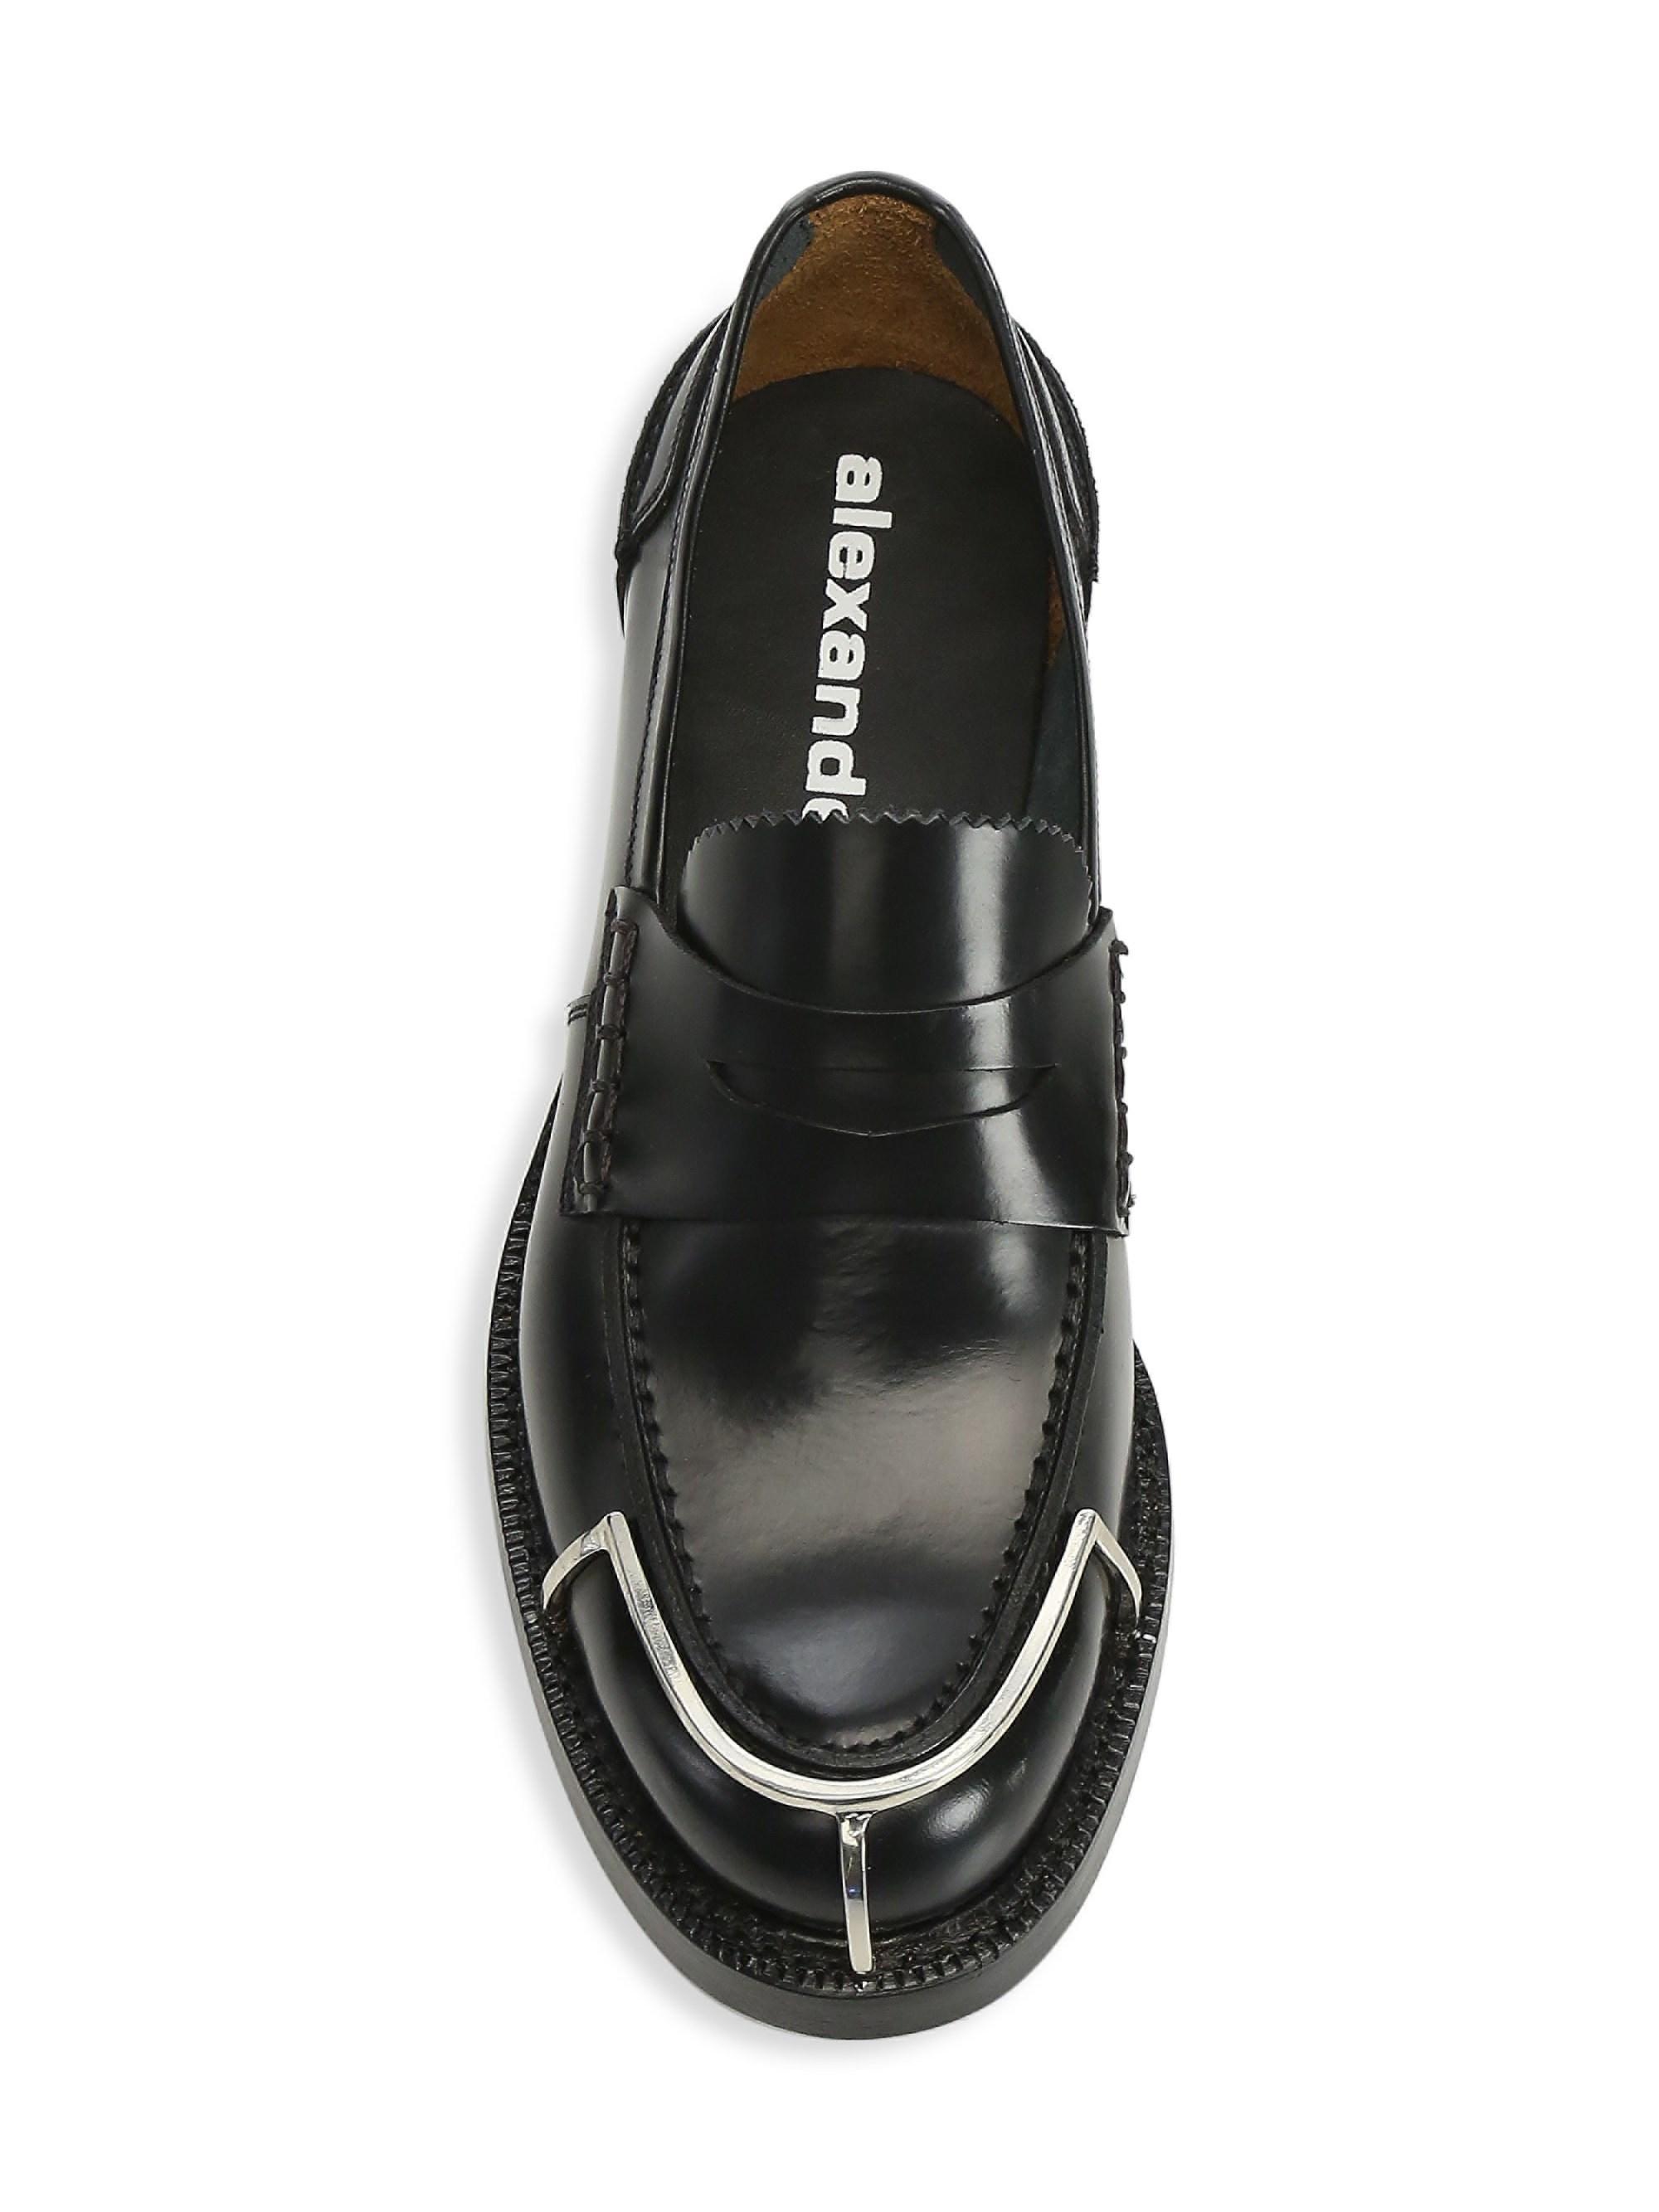 Alexander Wang Carter Leather Penny Loafers in Black | Lyst